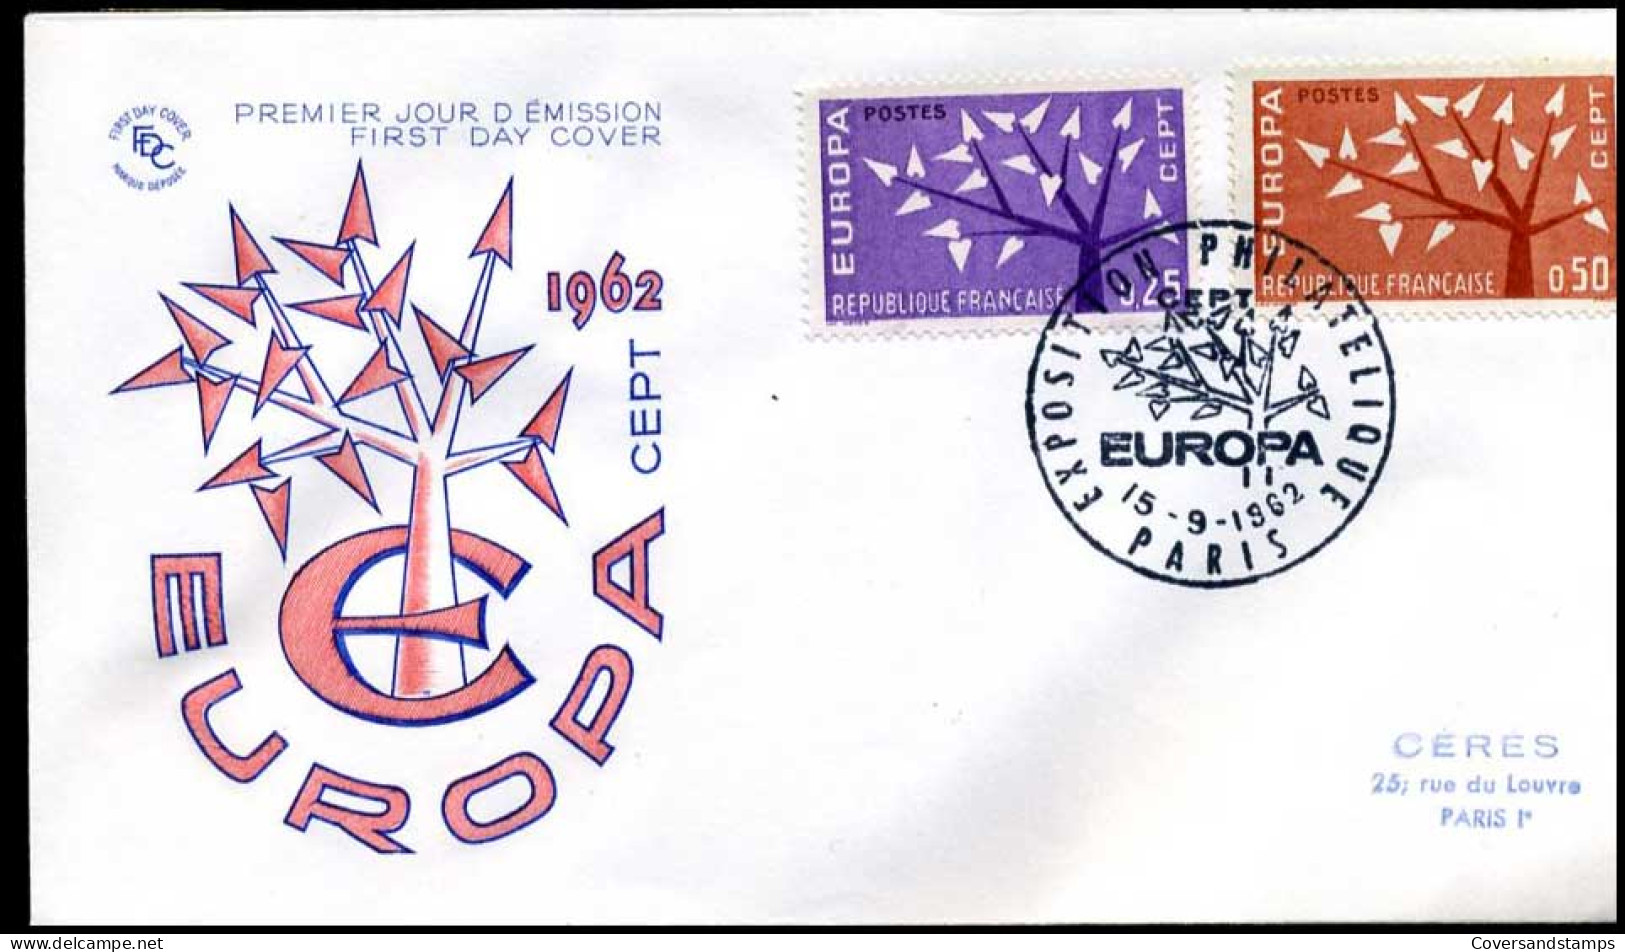 France - FDC - Europa CEPT 1962 - 1962